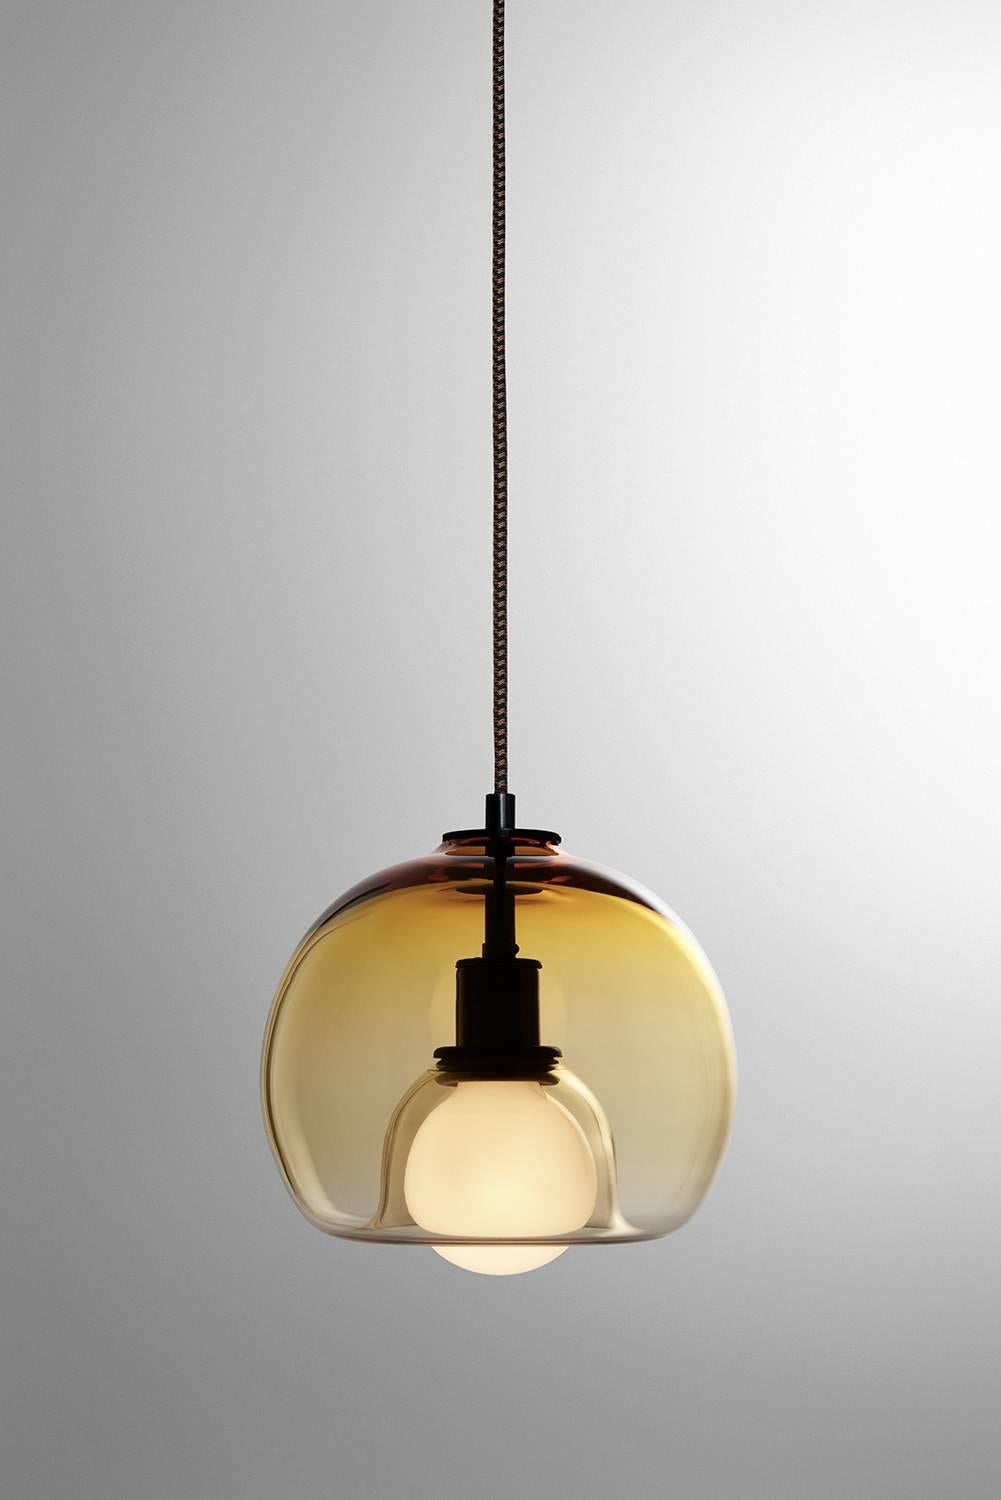 A handblown orb gracefully inverted to house a globe bulb, like a pearl encased in a glass oyster. The Eres Gold has an 8” diameter with a 4' black and brown houndstooth fabric-covered cord and a 4.75” diameter black porcelain canopy. Houses one